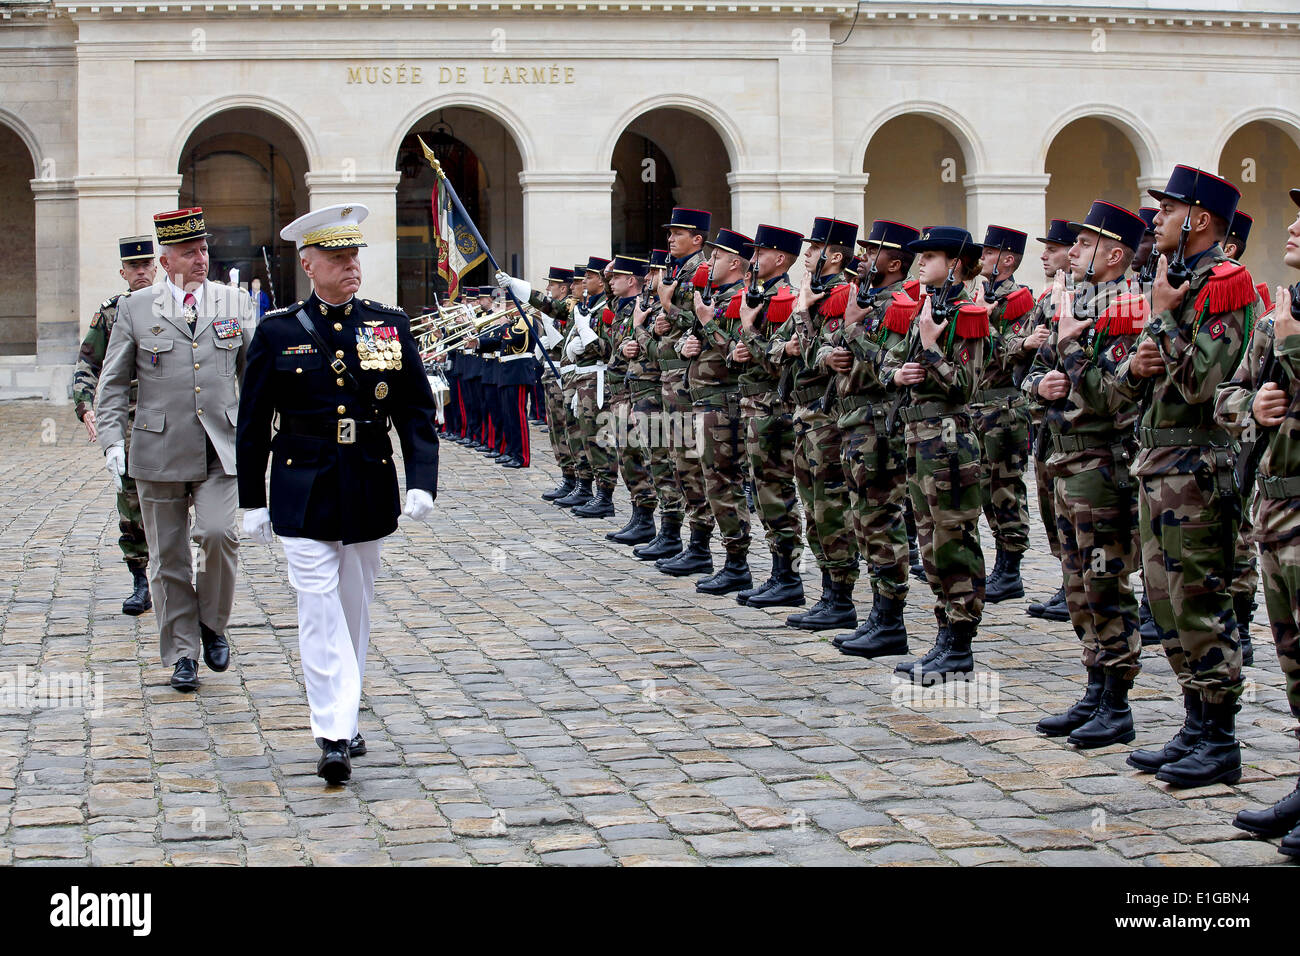 US Marine Corps General James F. Amos, commandant of the Marine Corps, during an honors ceremony hosted by chief of staff of the French army, General Bertrand Ract-Madoux, at Les Invalides May 26, 2014 in Paris, France. Stock Photo